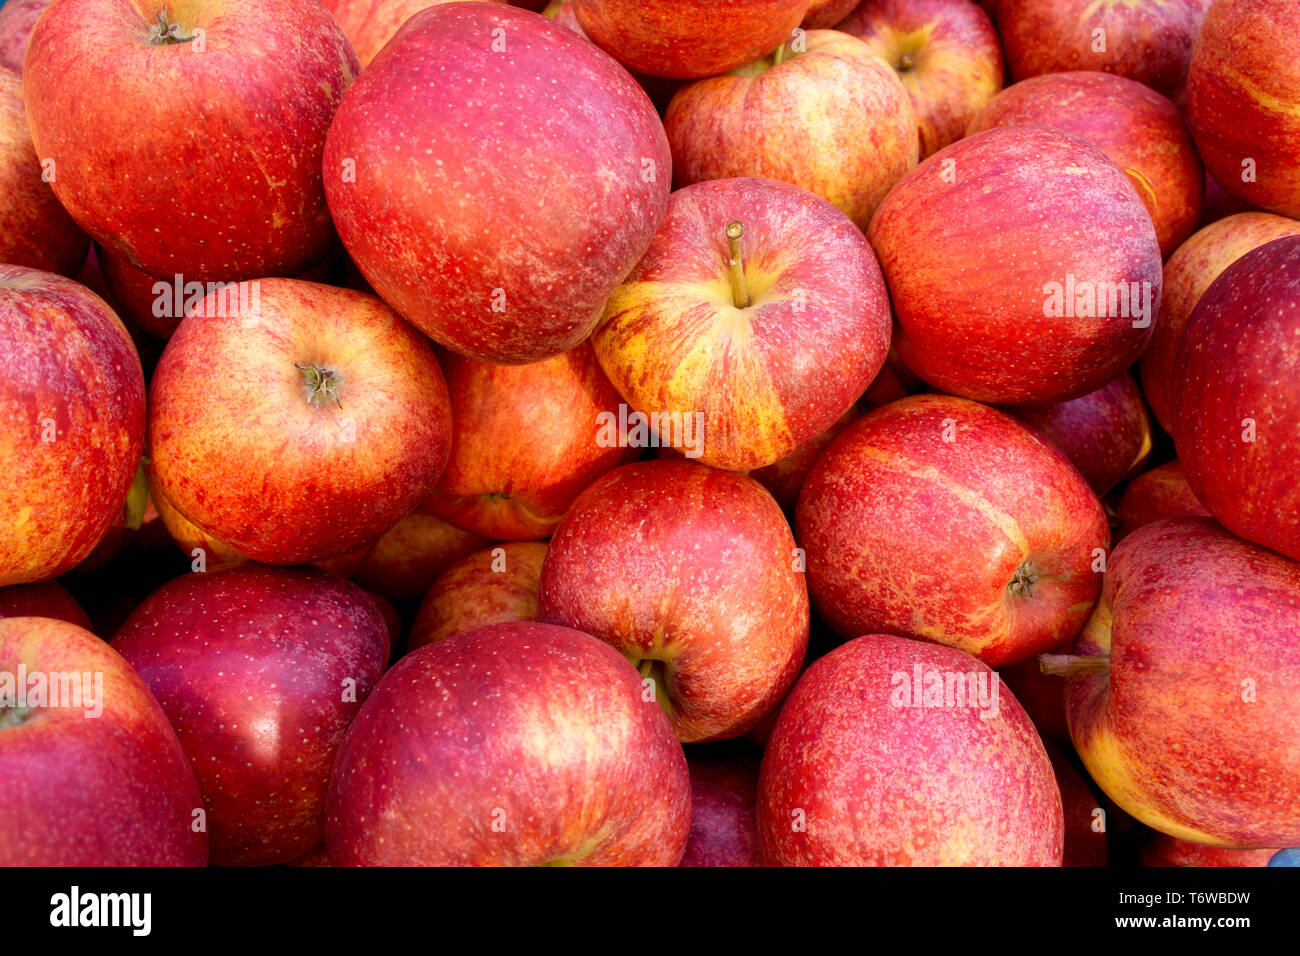 https://c8.alamy.com/comp/T6WBDW/red-gala-apples-on-sales-at-the-market-T6WBDW.jpg